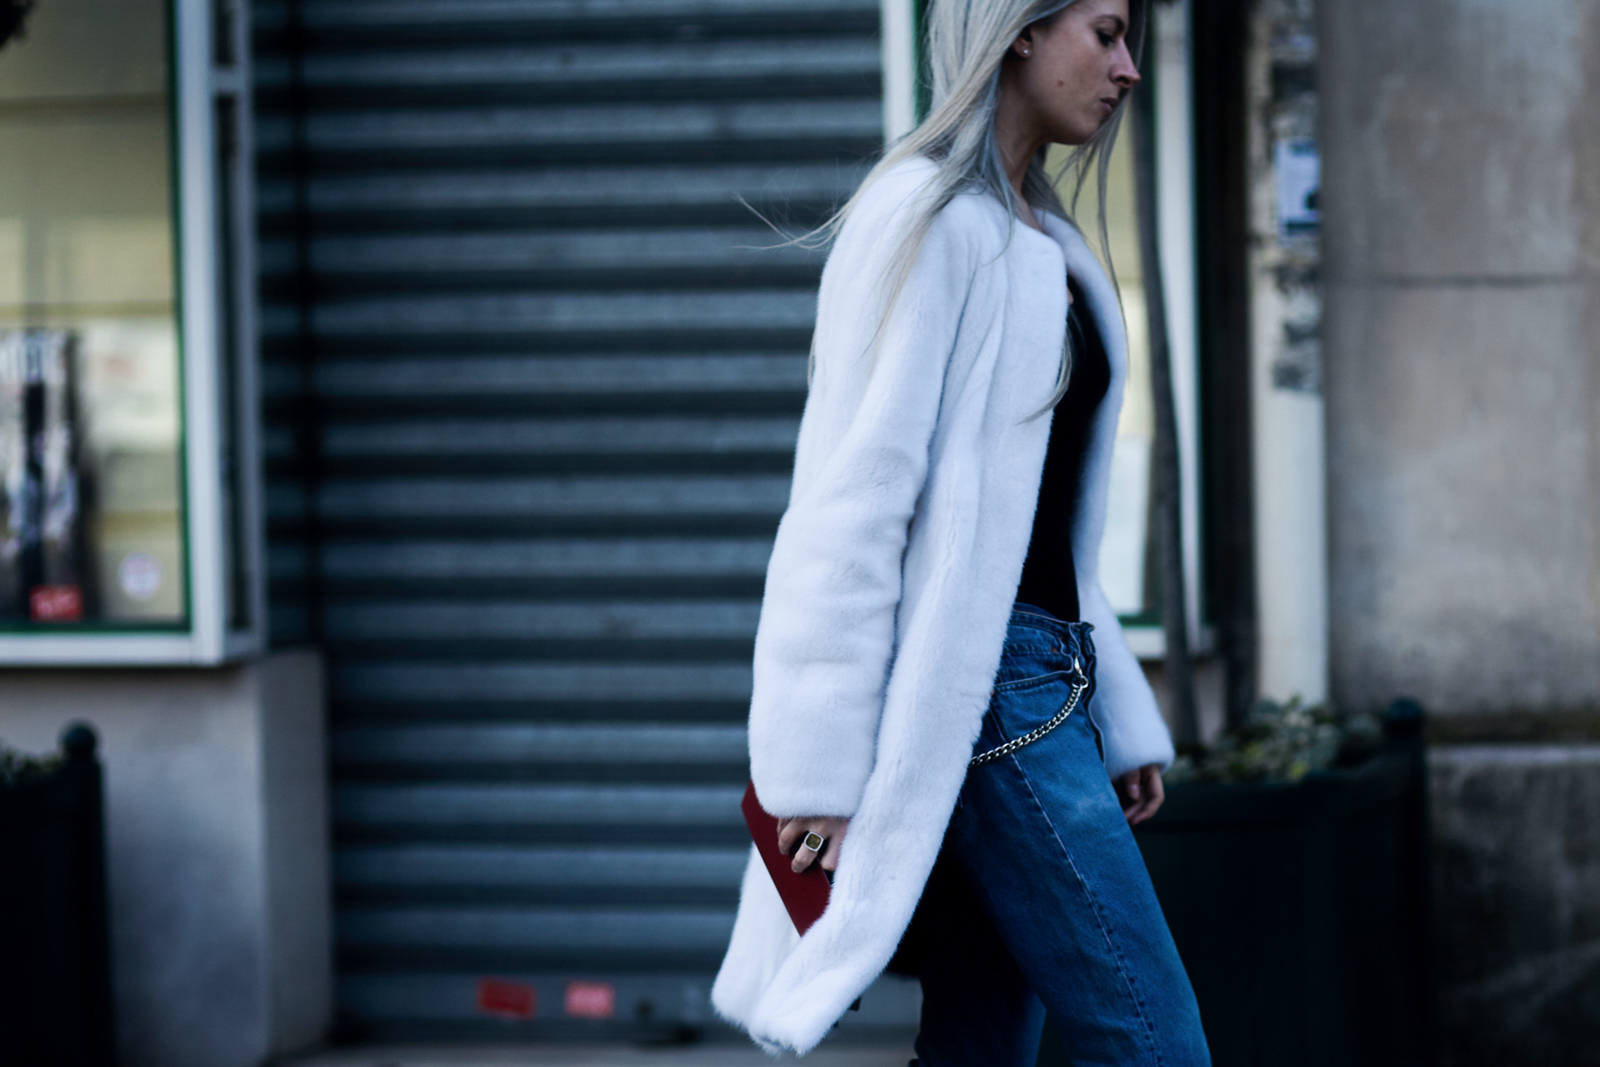 PFW Street Style: Vogue UK's Sarah Harris wearing a white fur coat and Robert Clergerie slippers after a show in Paris, France